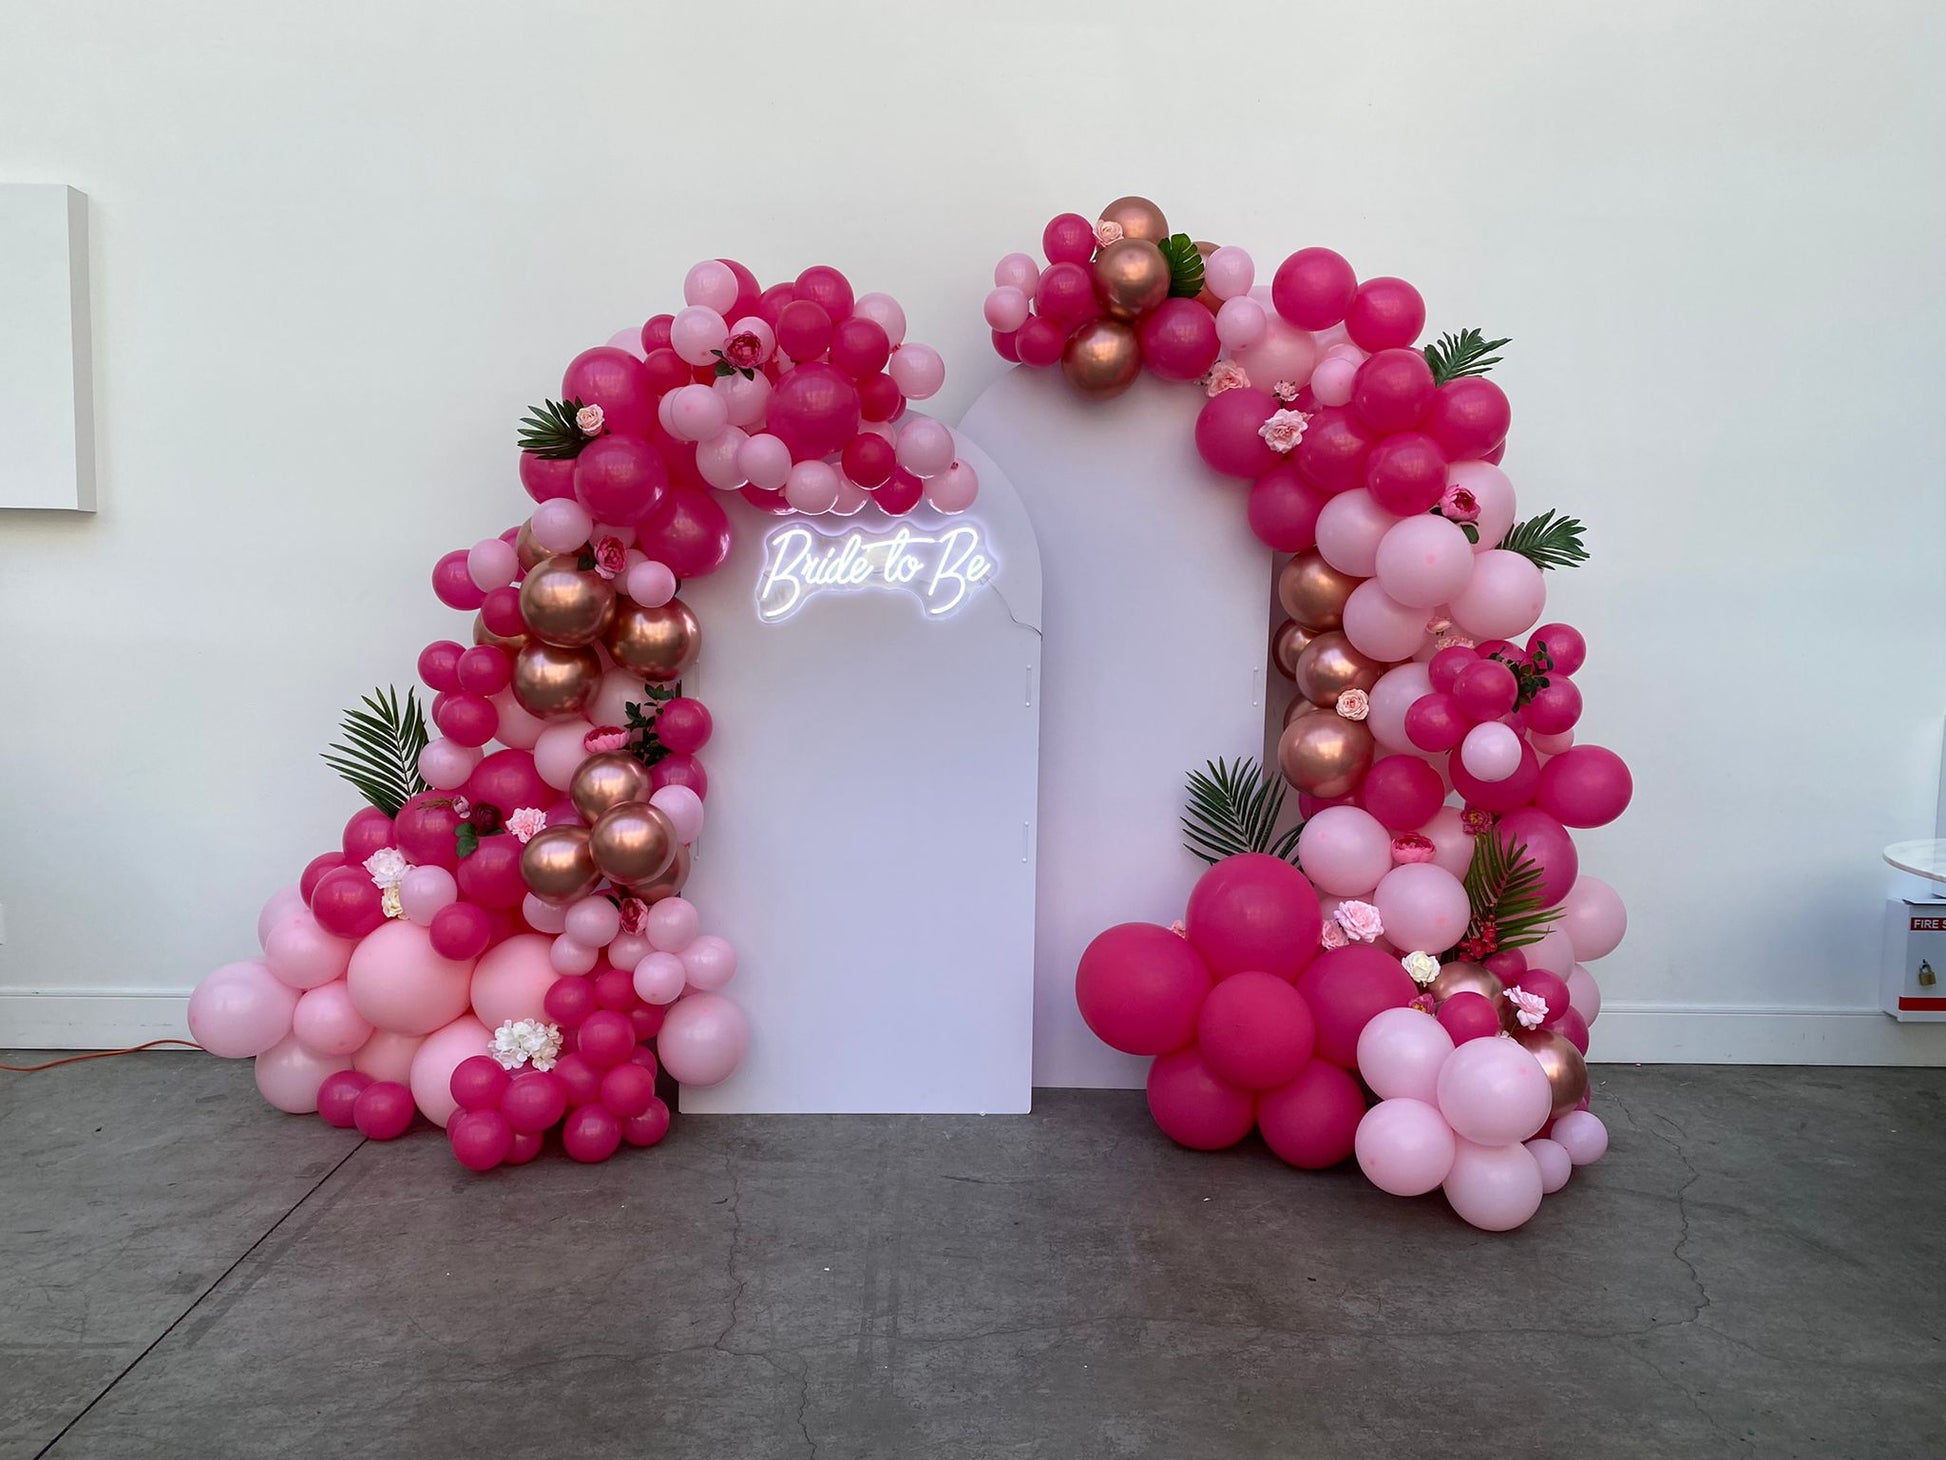 ink balloon arch setup for an event.